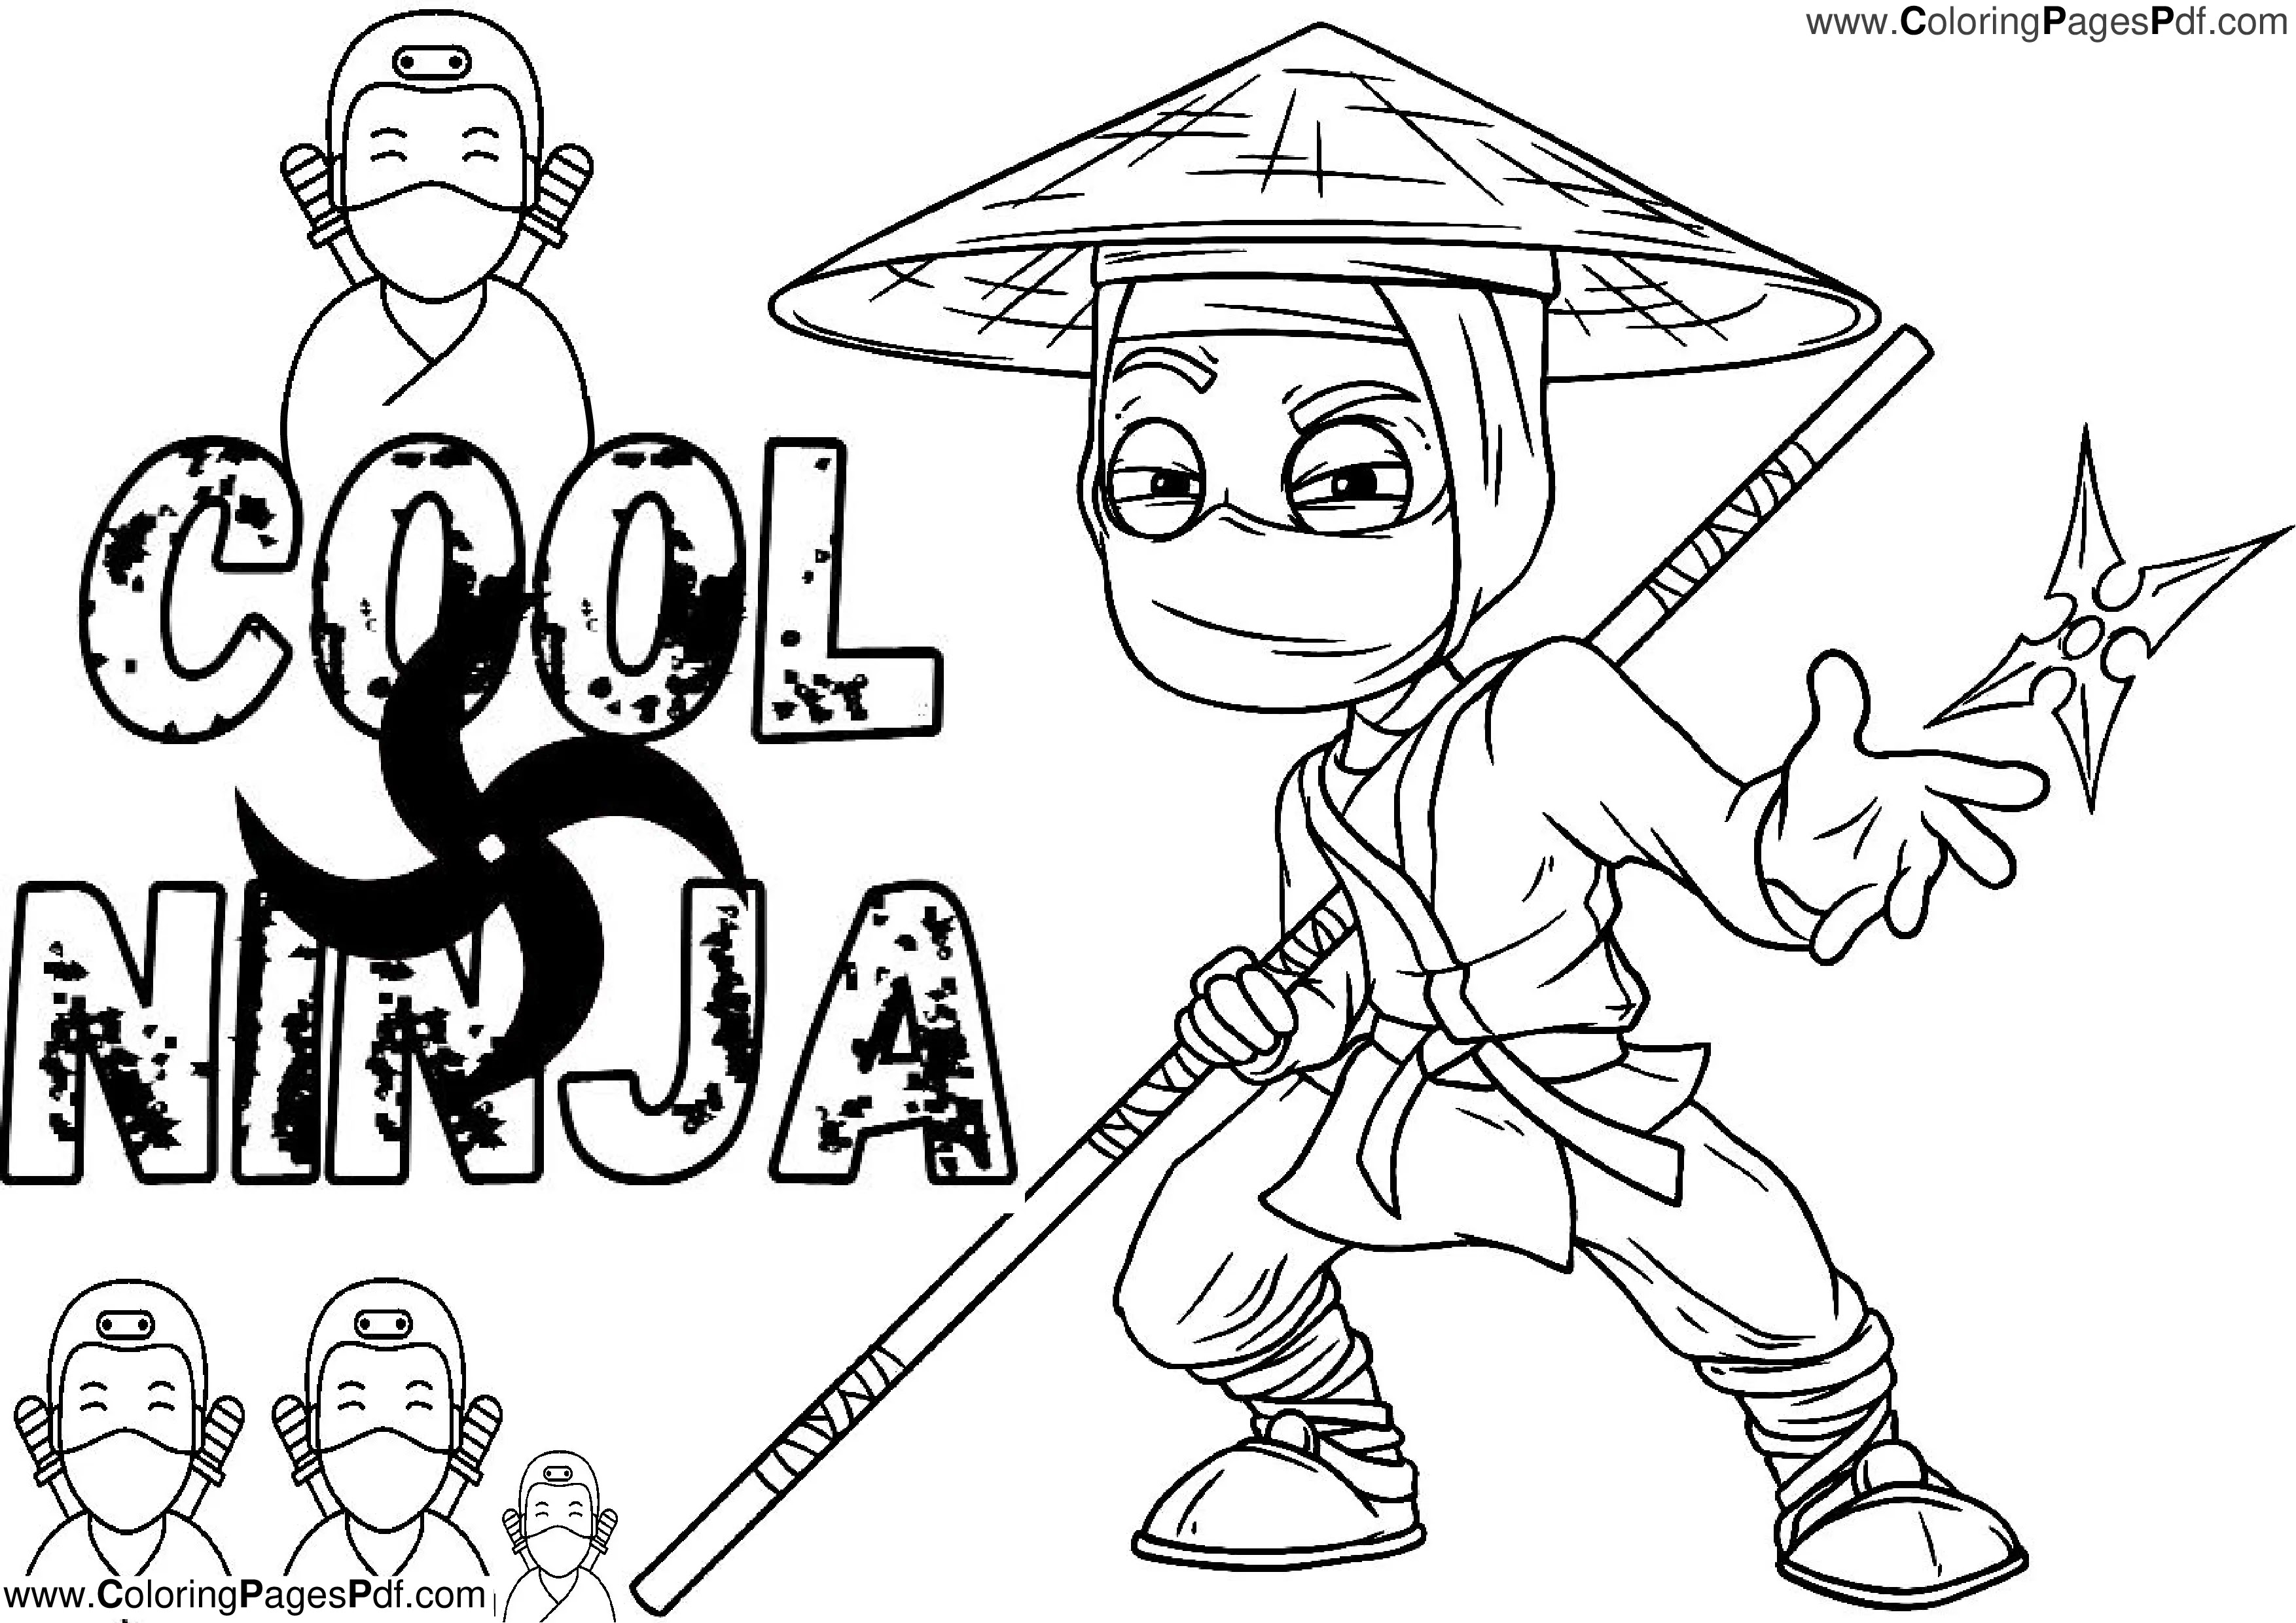 Cool Ninja coloring pages